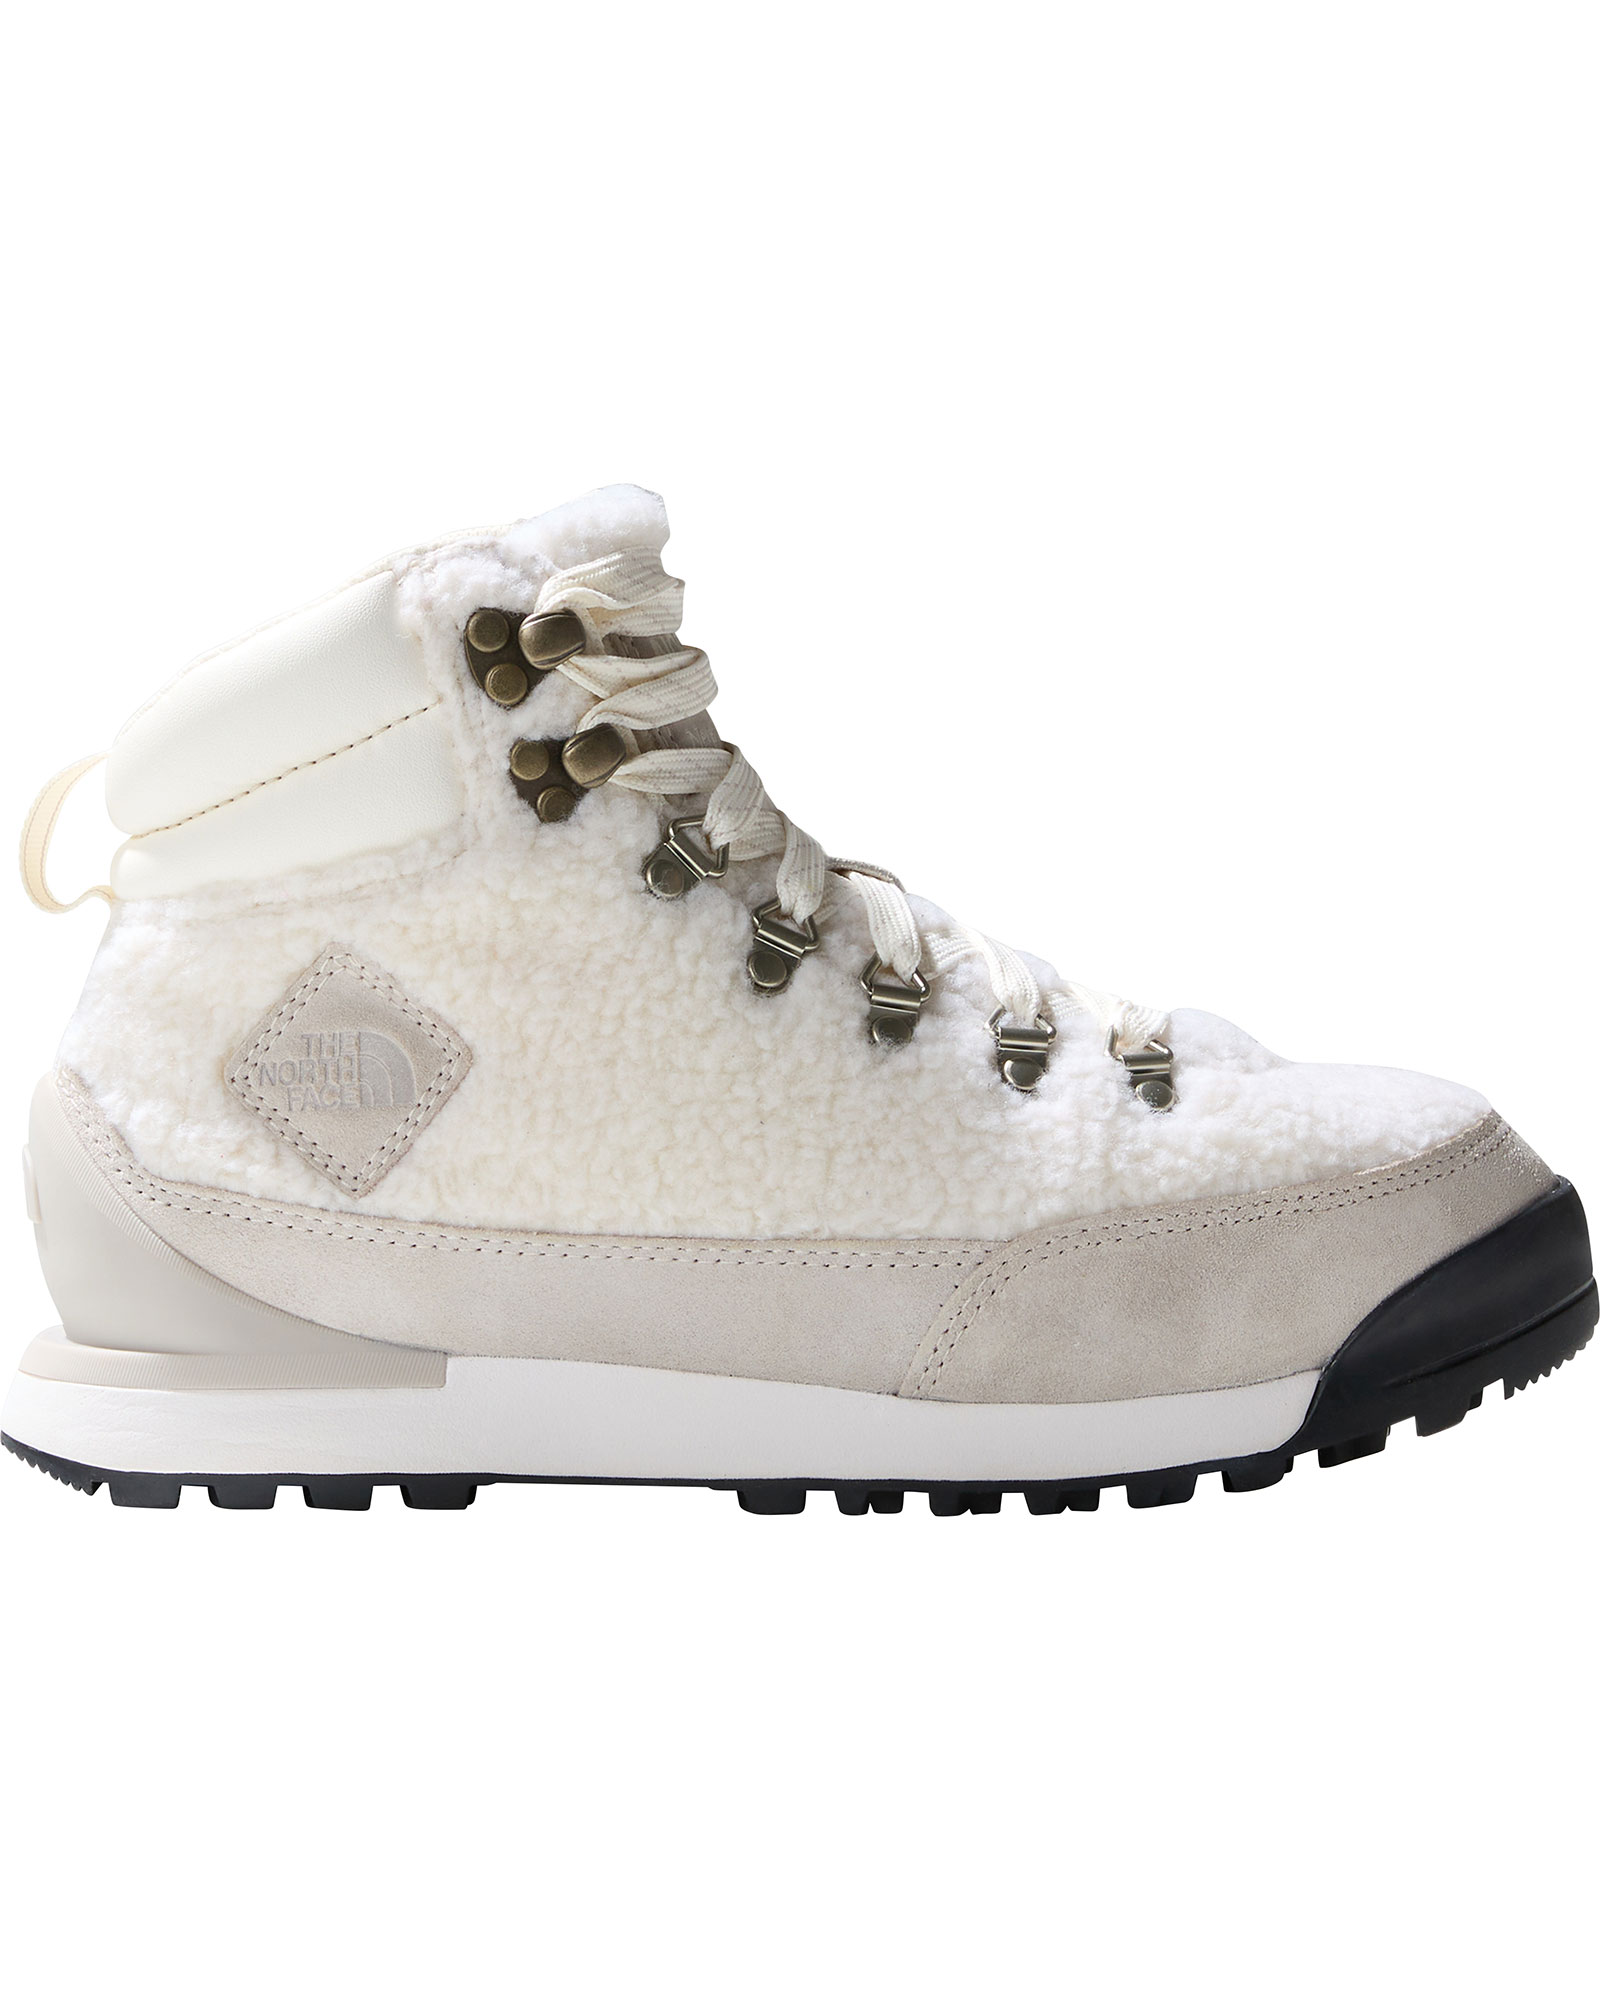 The North Face Back to Berkeley High Pile Women’s Boots - Gardenia White/Silver Grey UK 7